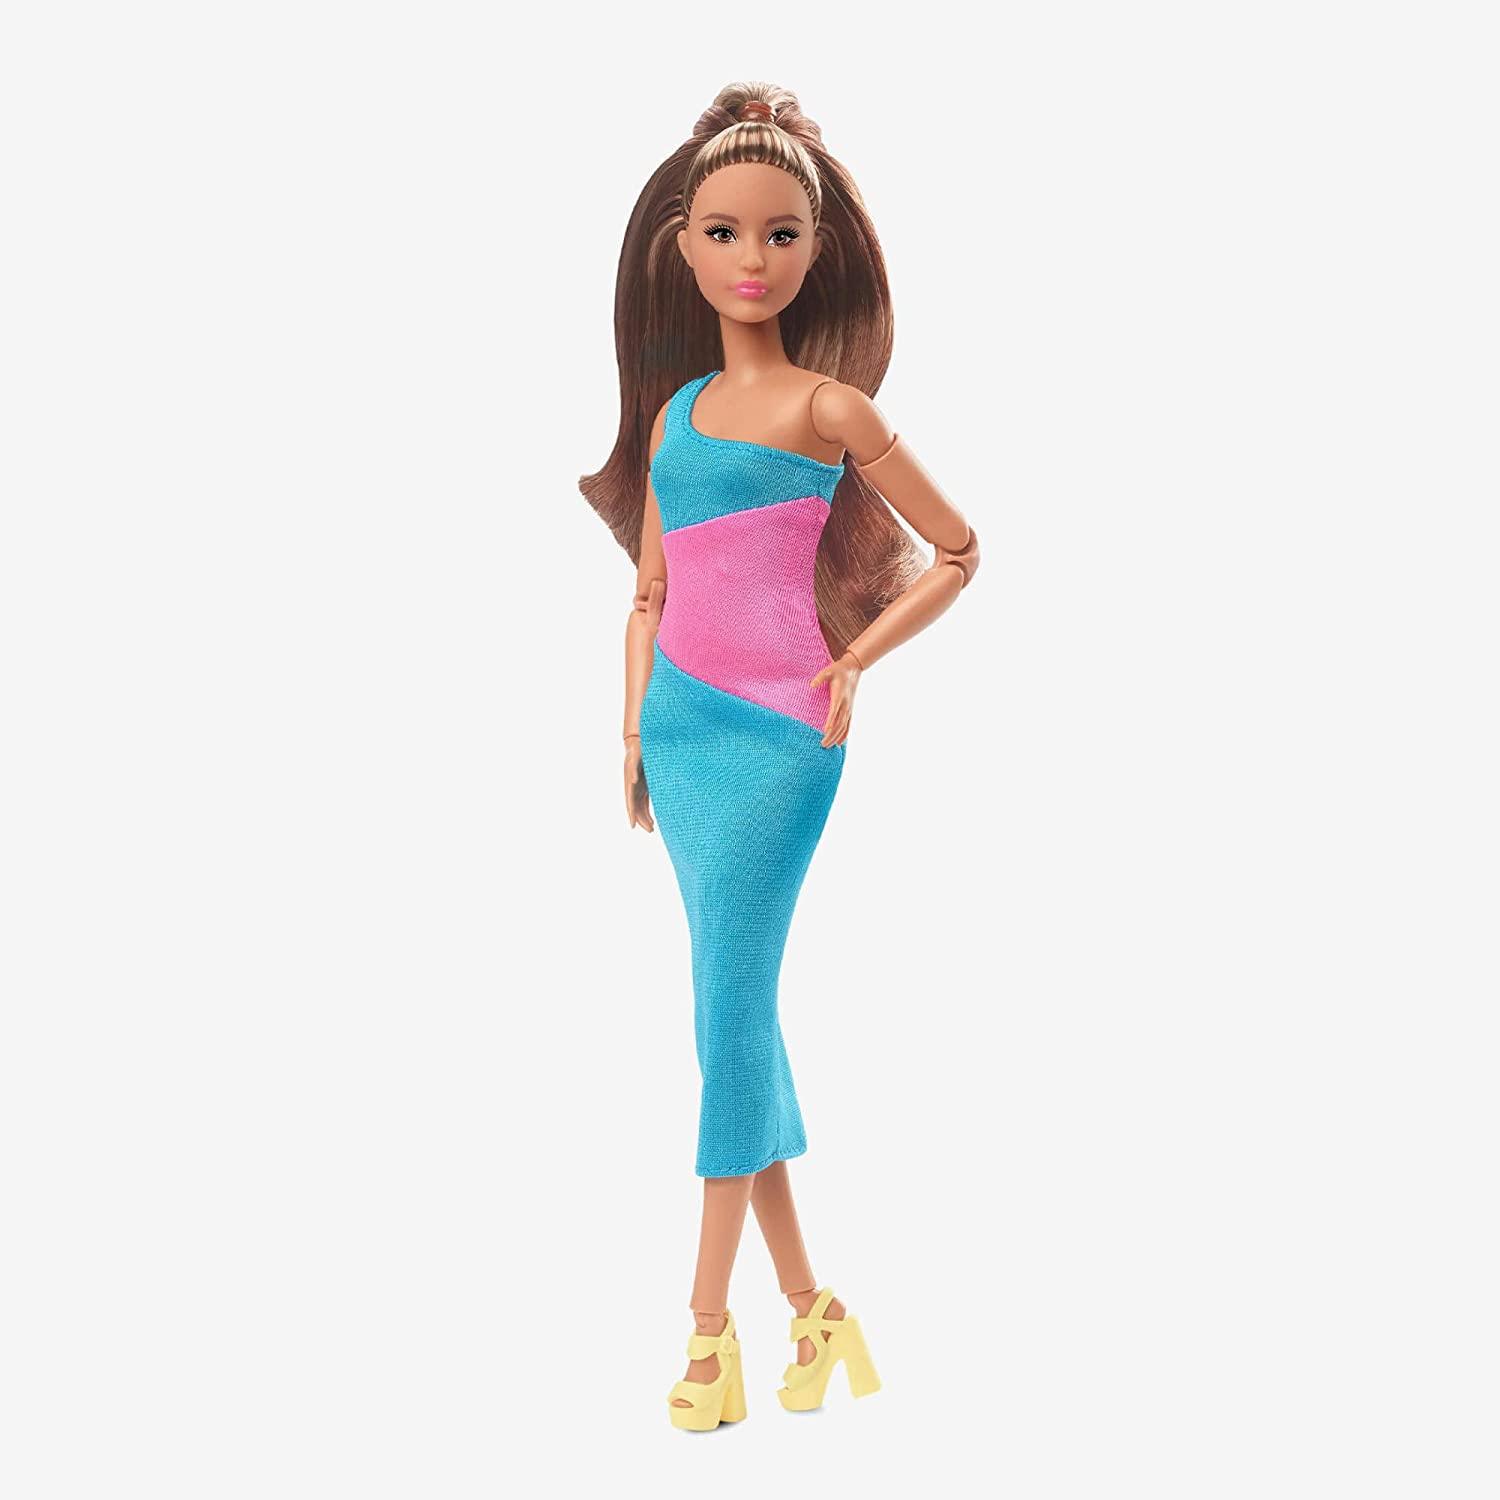 Barbie Looks Doll, Brunette, Color Block One-Shoulder Midi Dress, Style and Pose, Fashion Collectibles, Barbie Signature Looks 2023 - BumbleToys - 5-7 Years, Barbie, Fashion Dolls & Accessories, Girls, Pre-Order